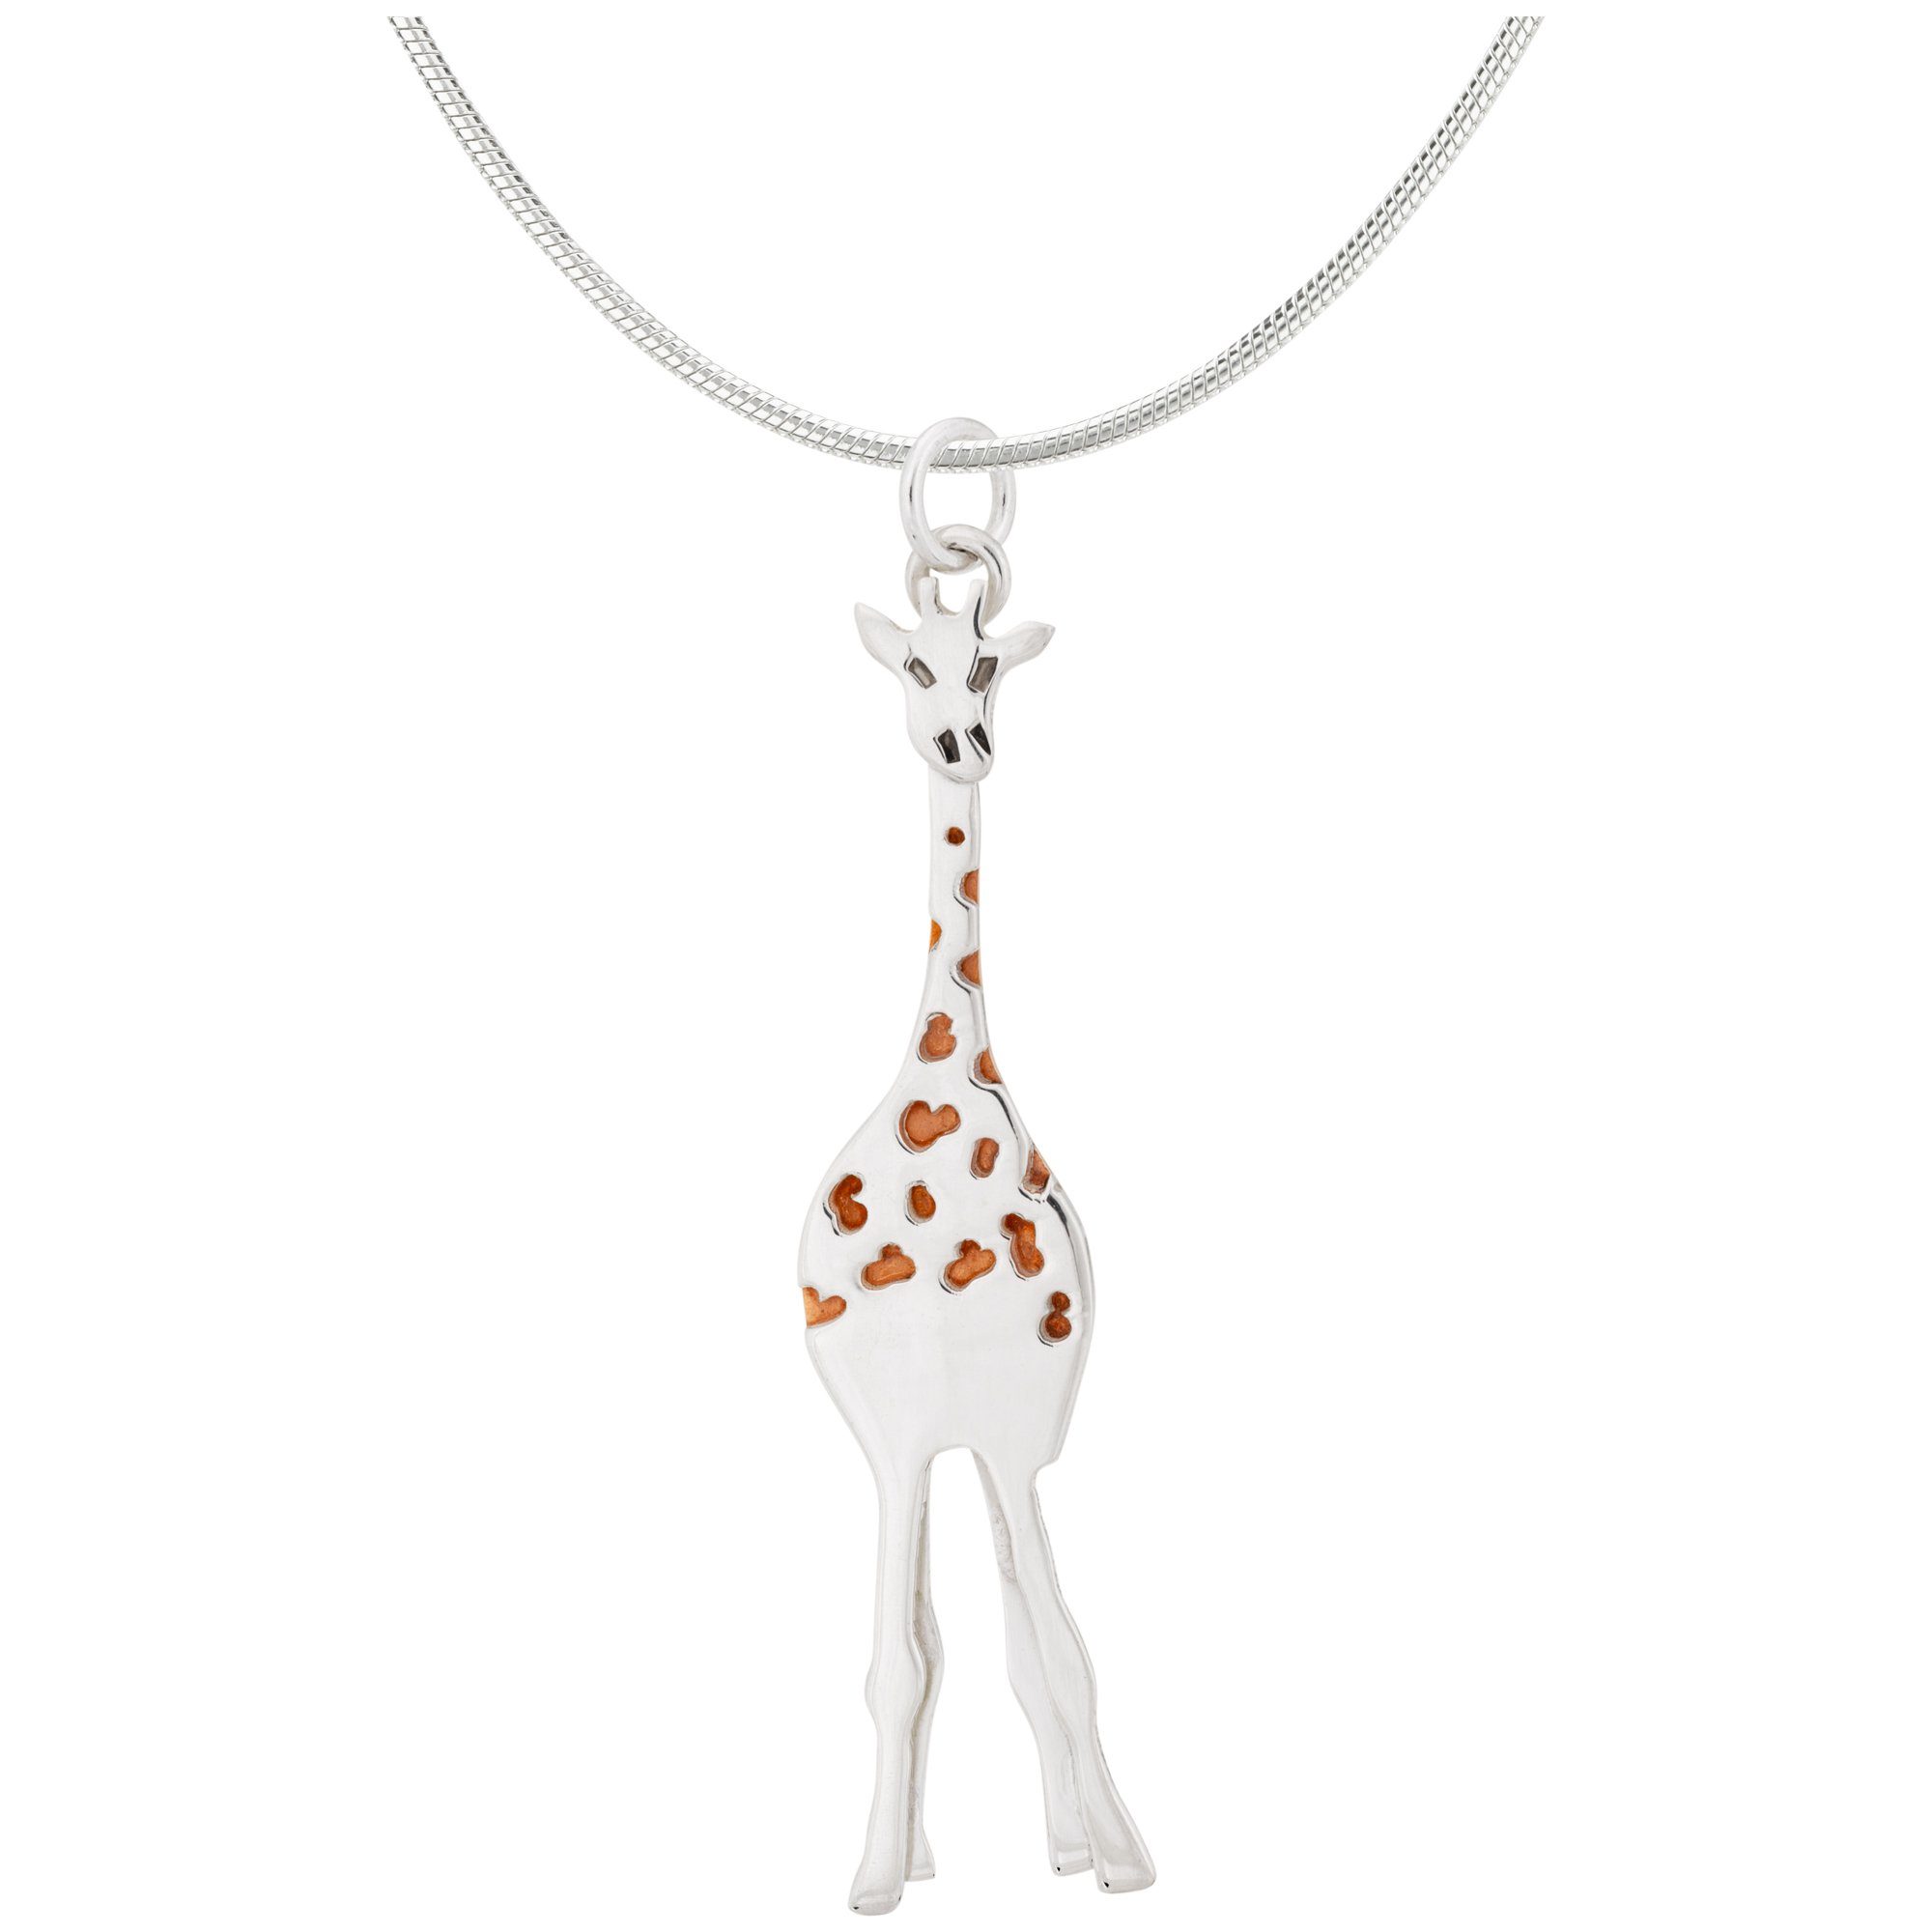 Gentle Giraffe Mixed Metal Necklace - With Snake Chain